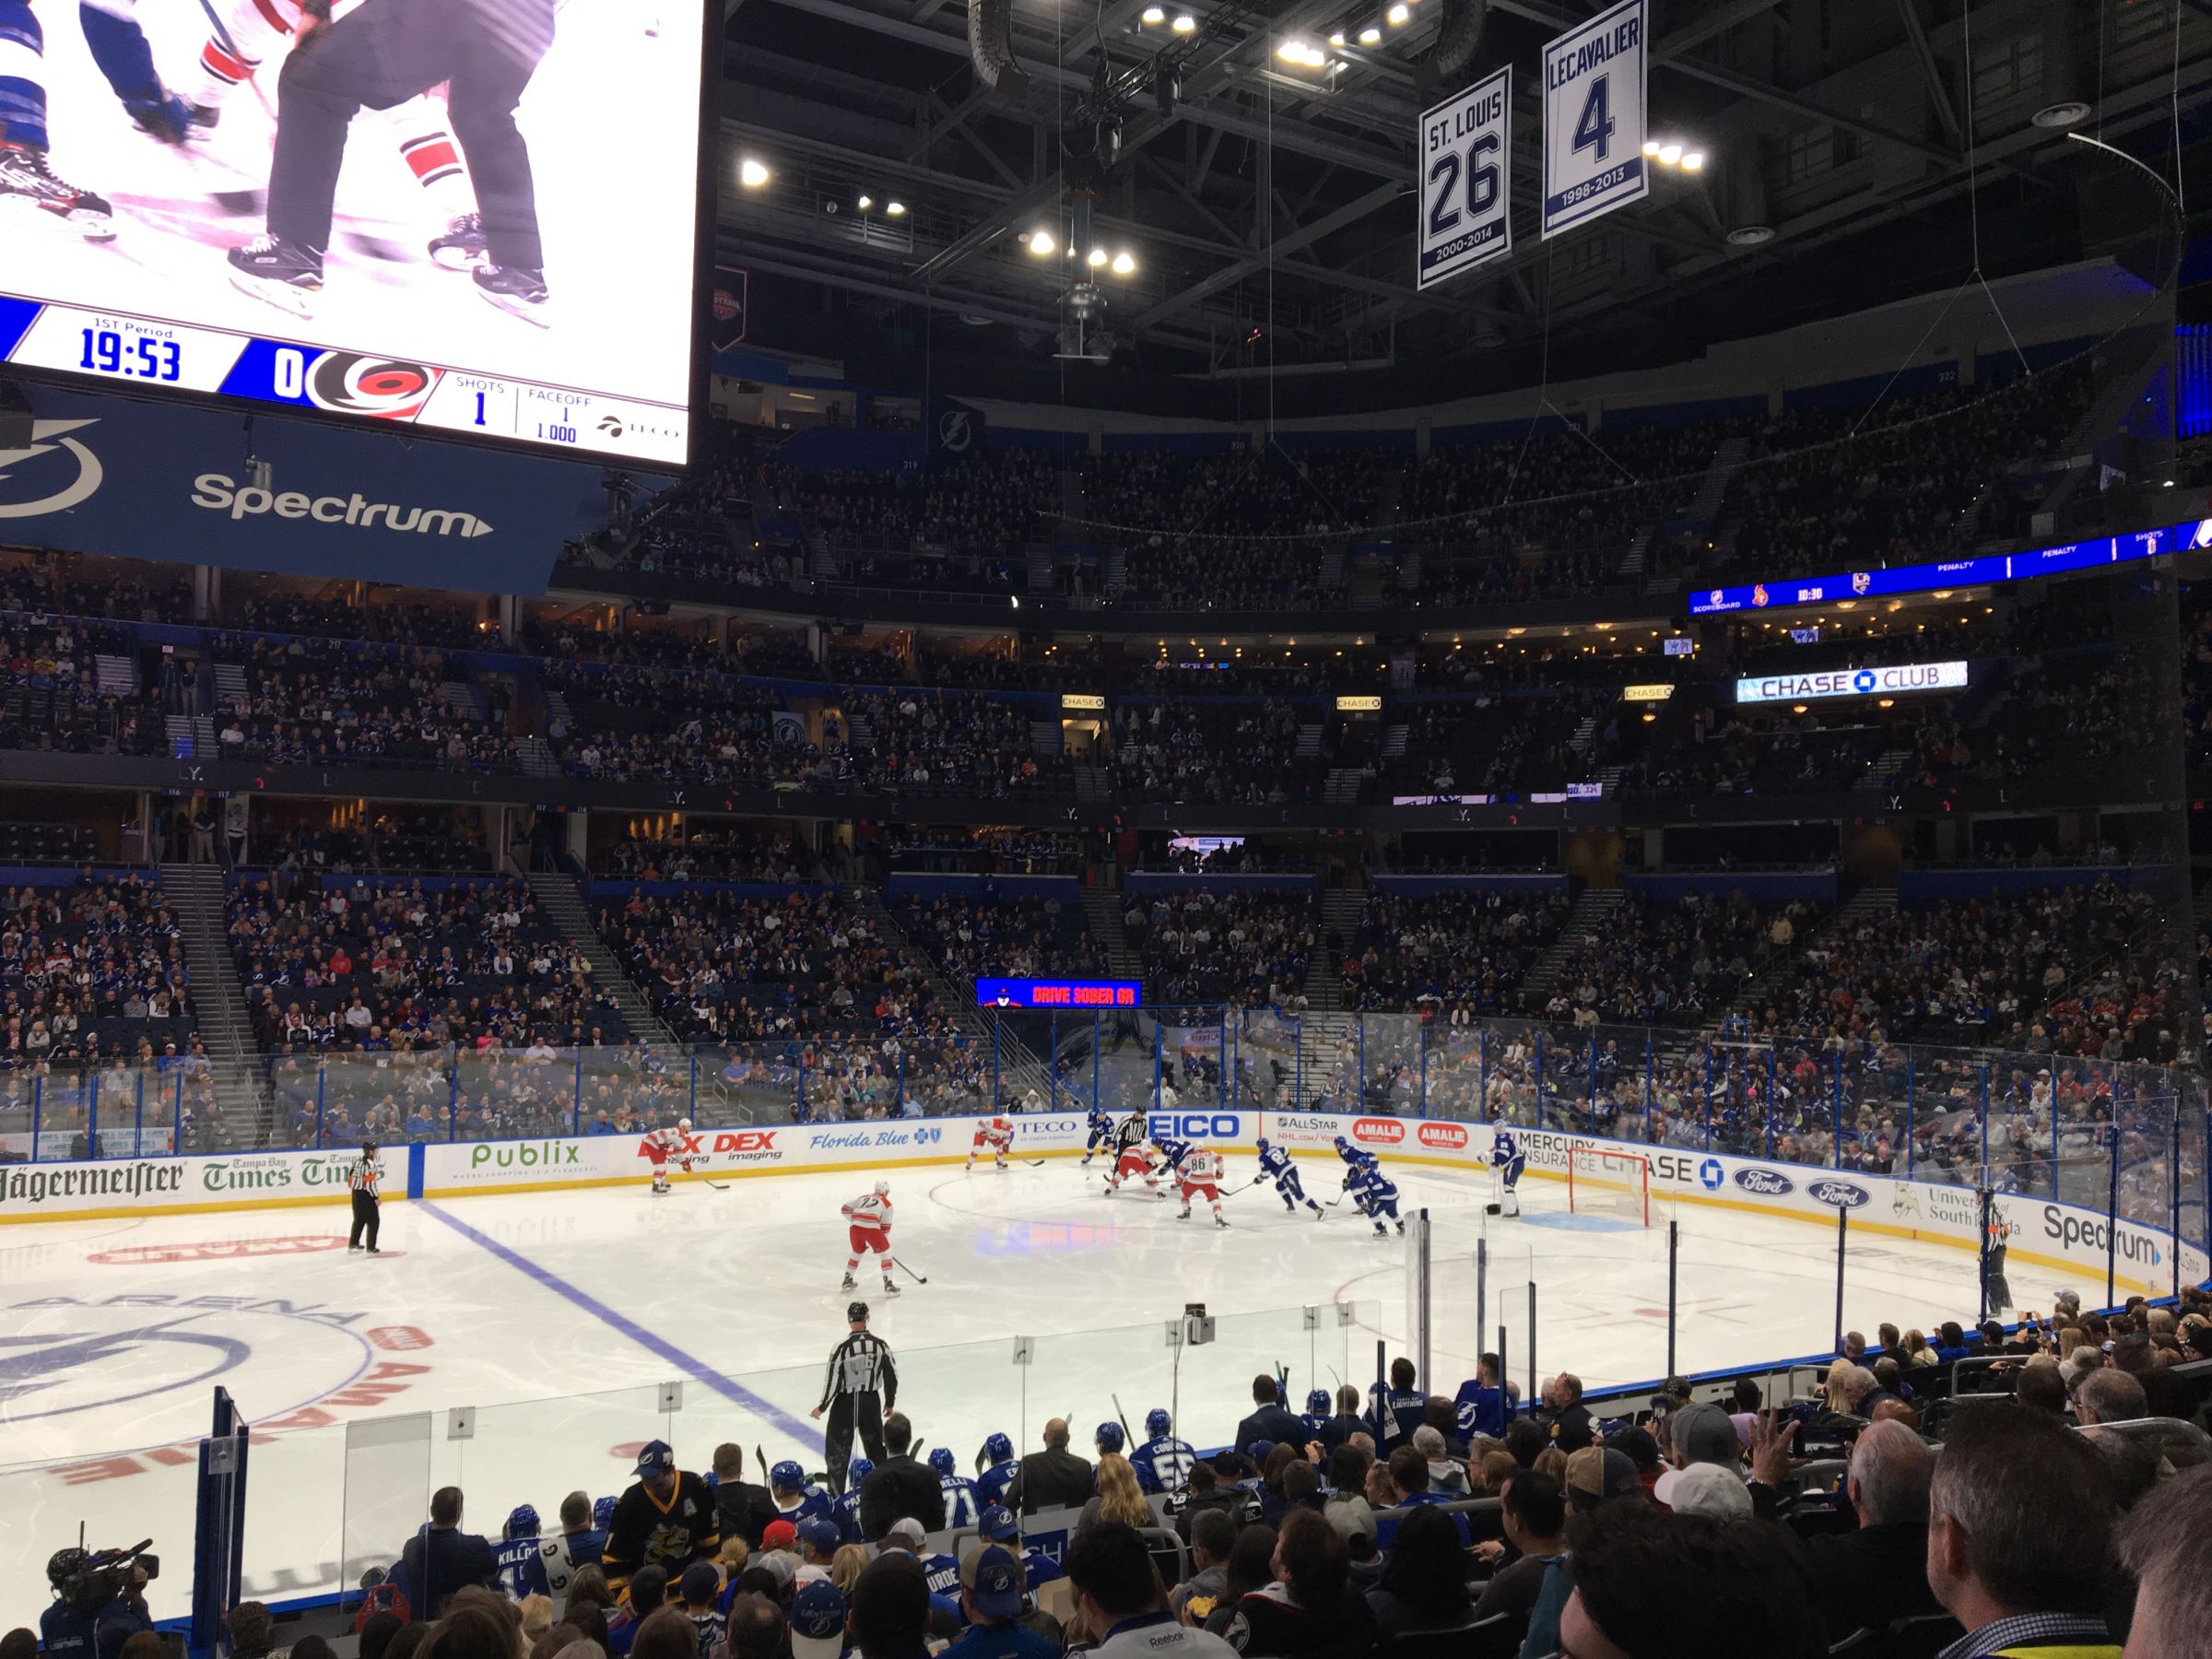 Section 101 at Amalie Arena 